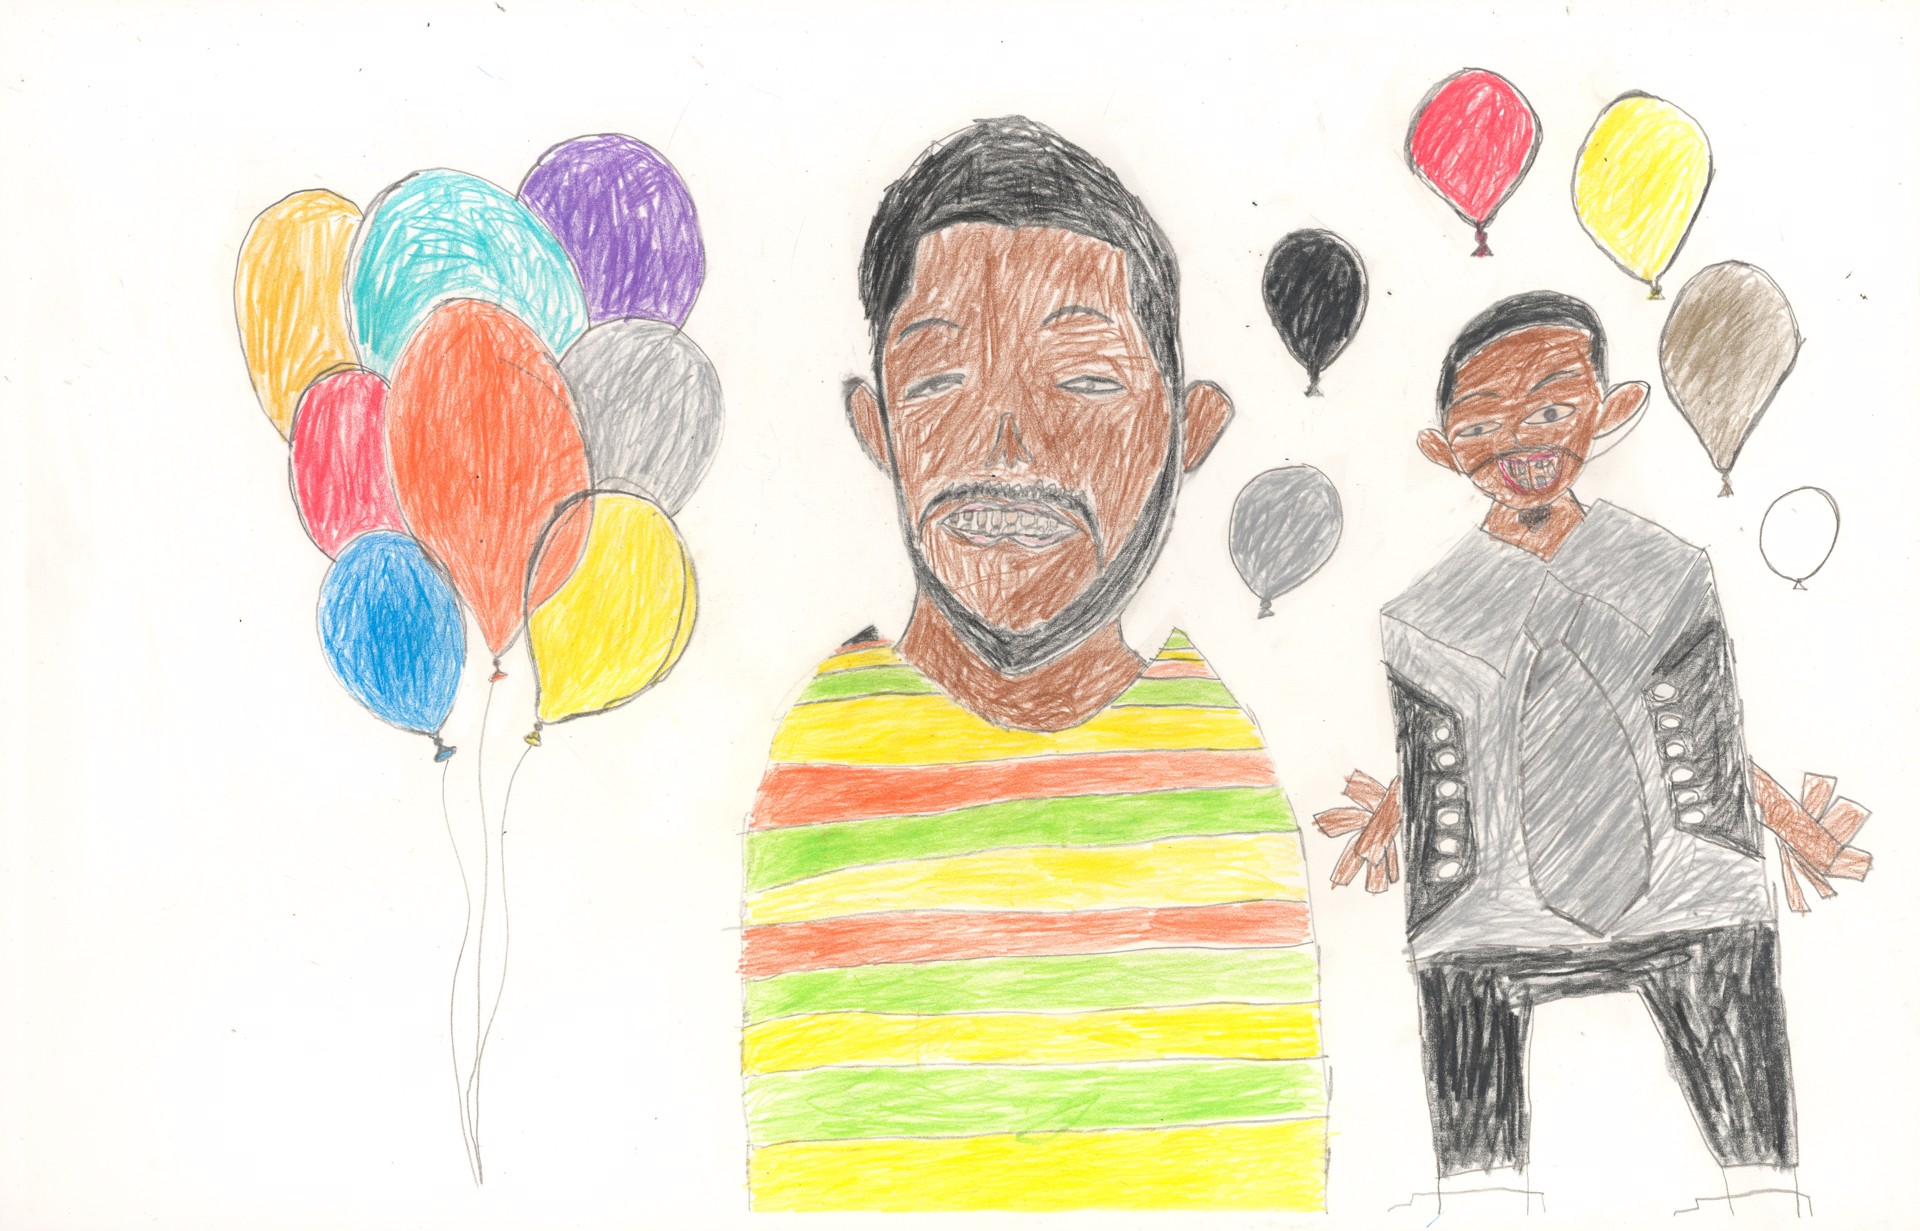 Maurice and Duane at the Prom by Duane Blacksheare-Staton